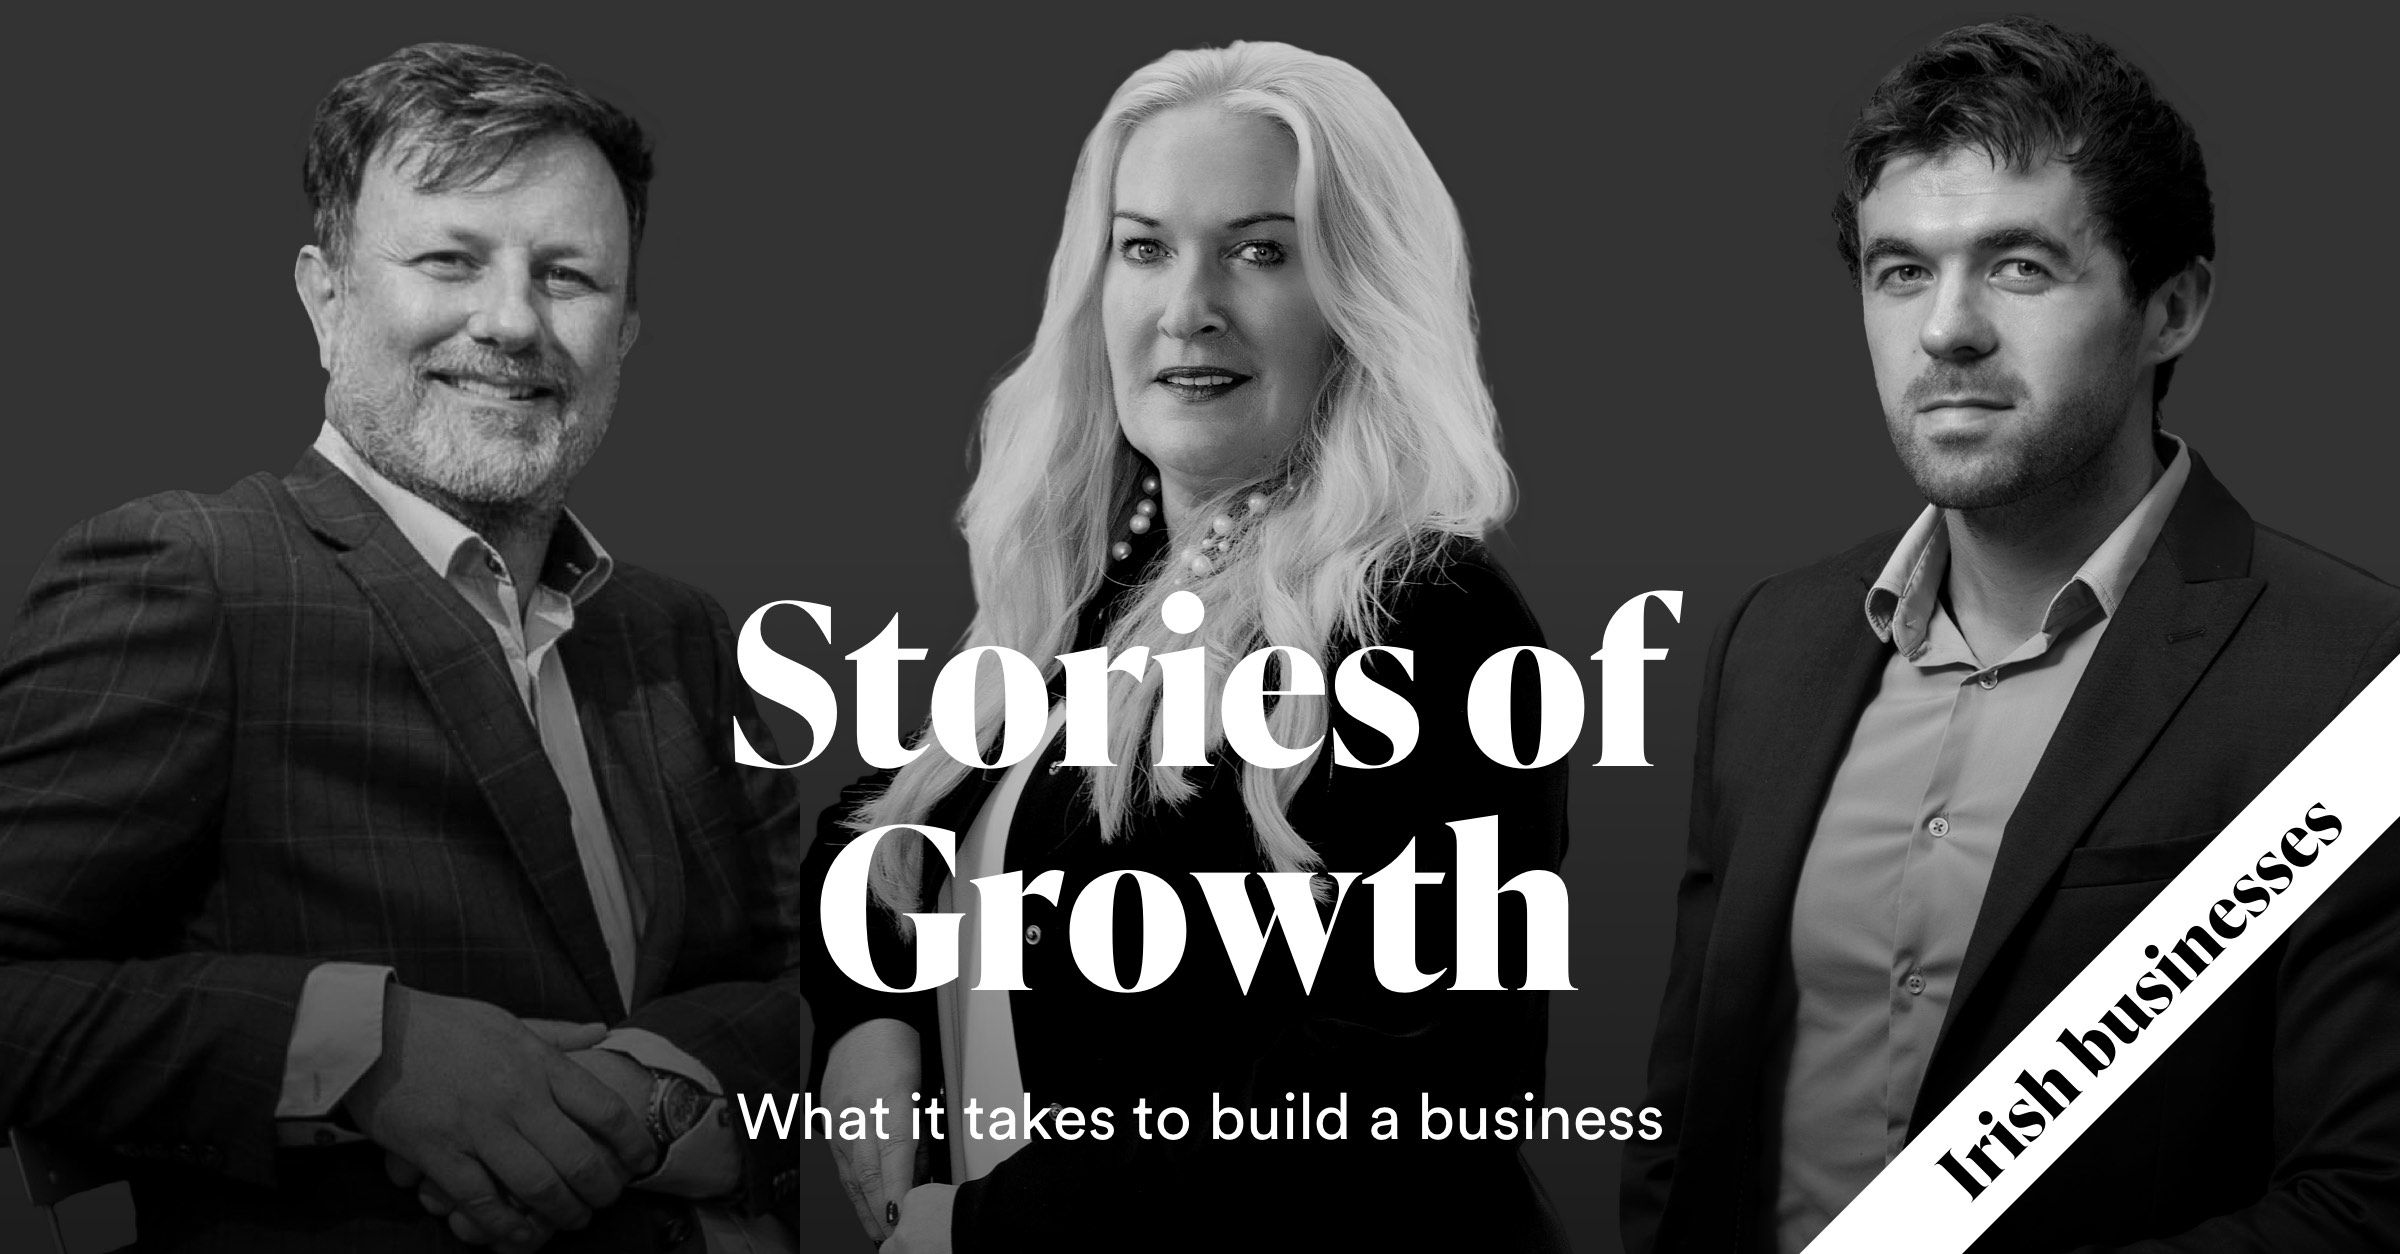 Stories of Growth: What it takes to build a business, according to top Irish entrepreneurs